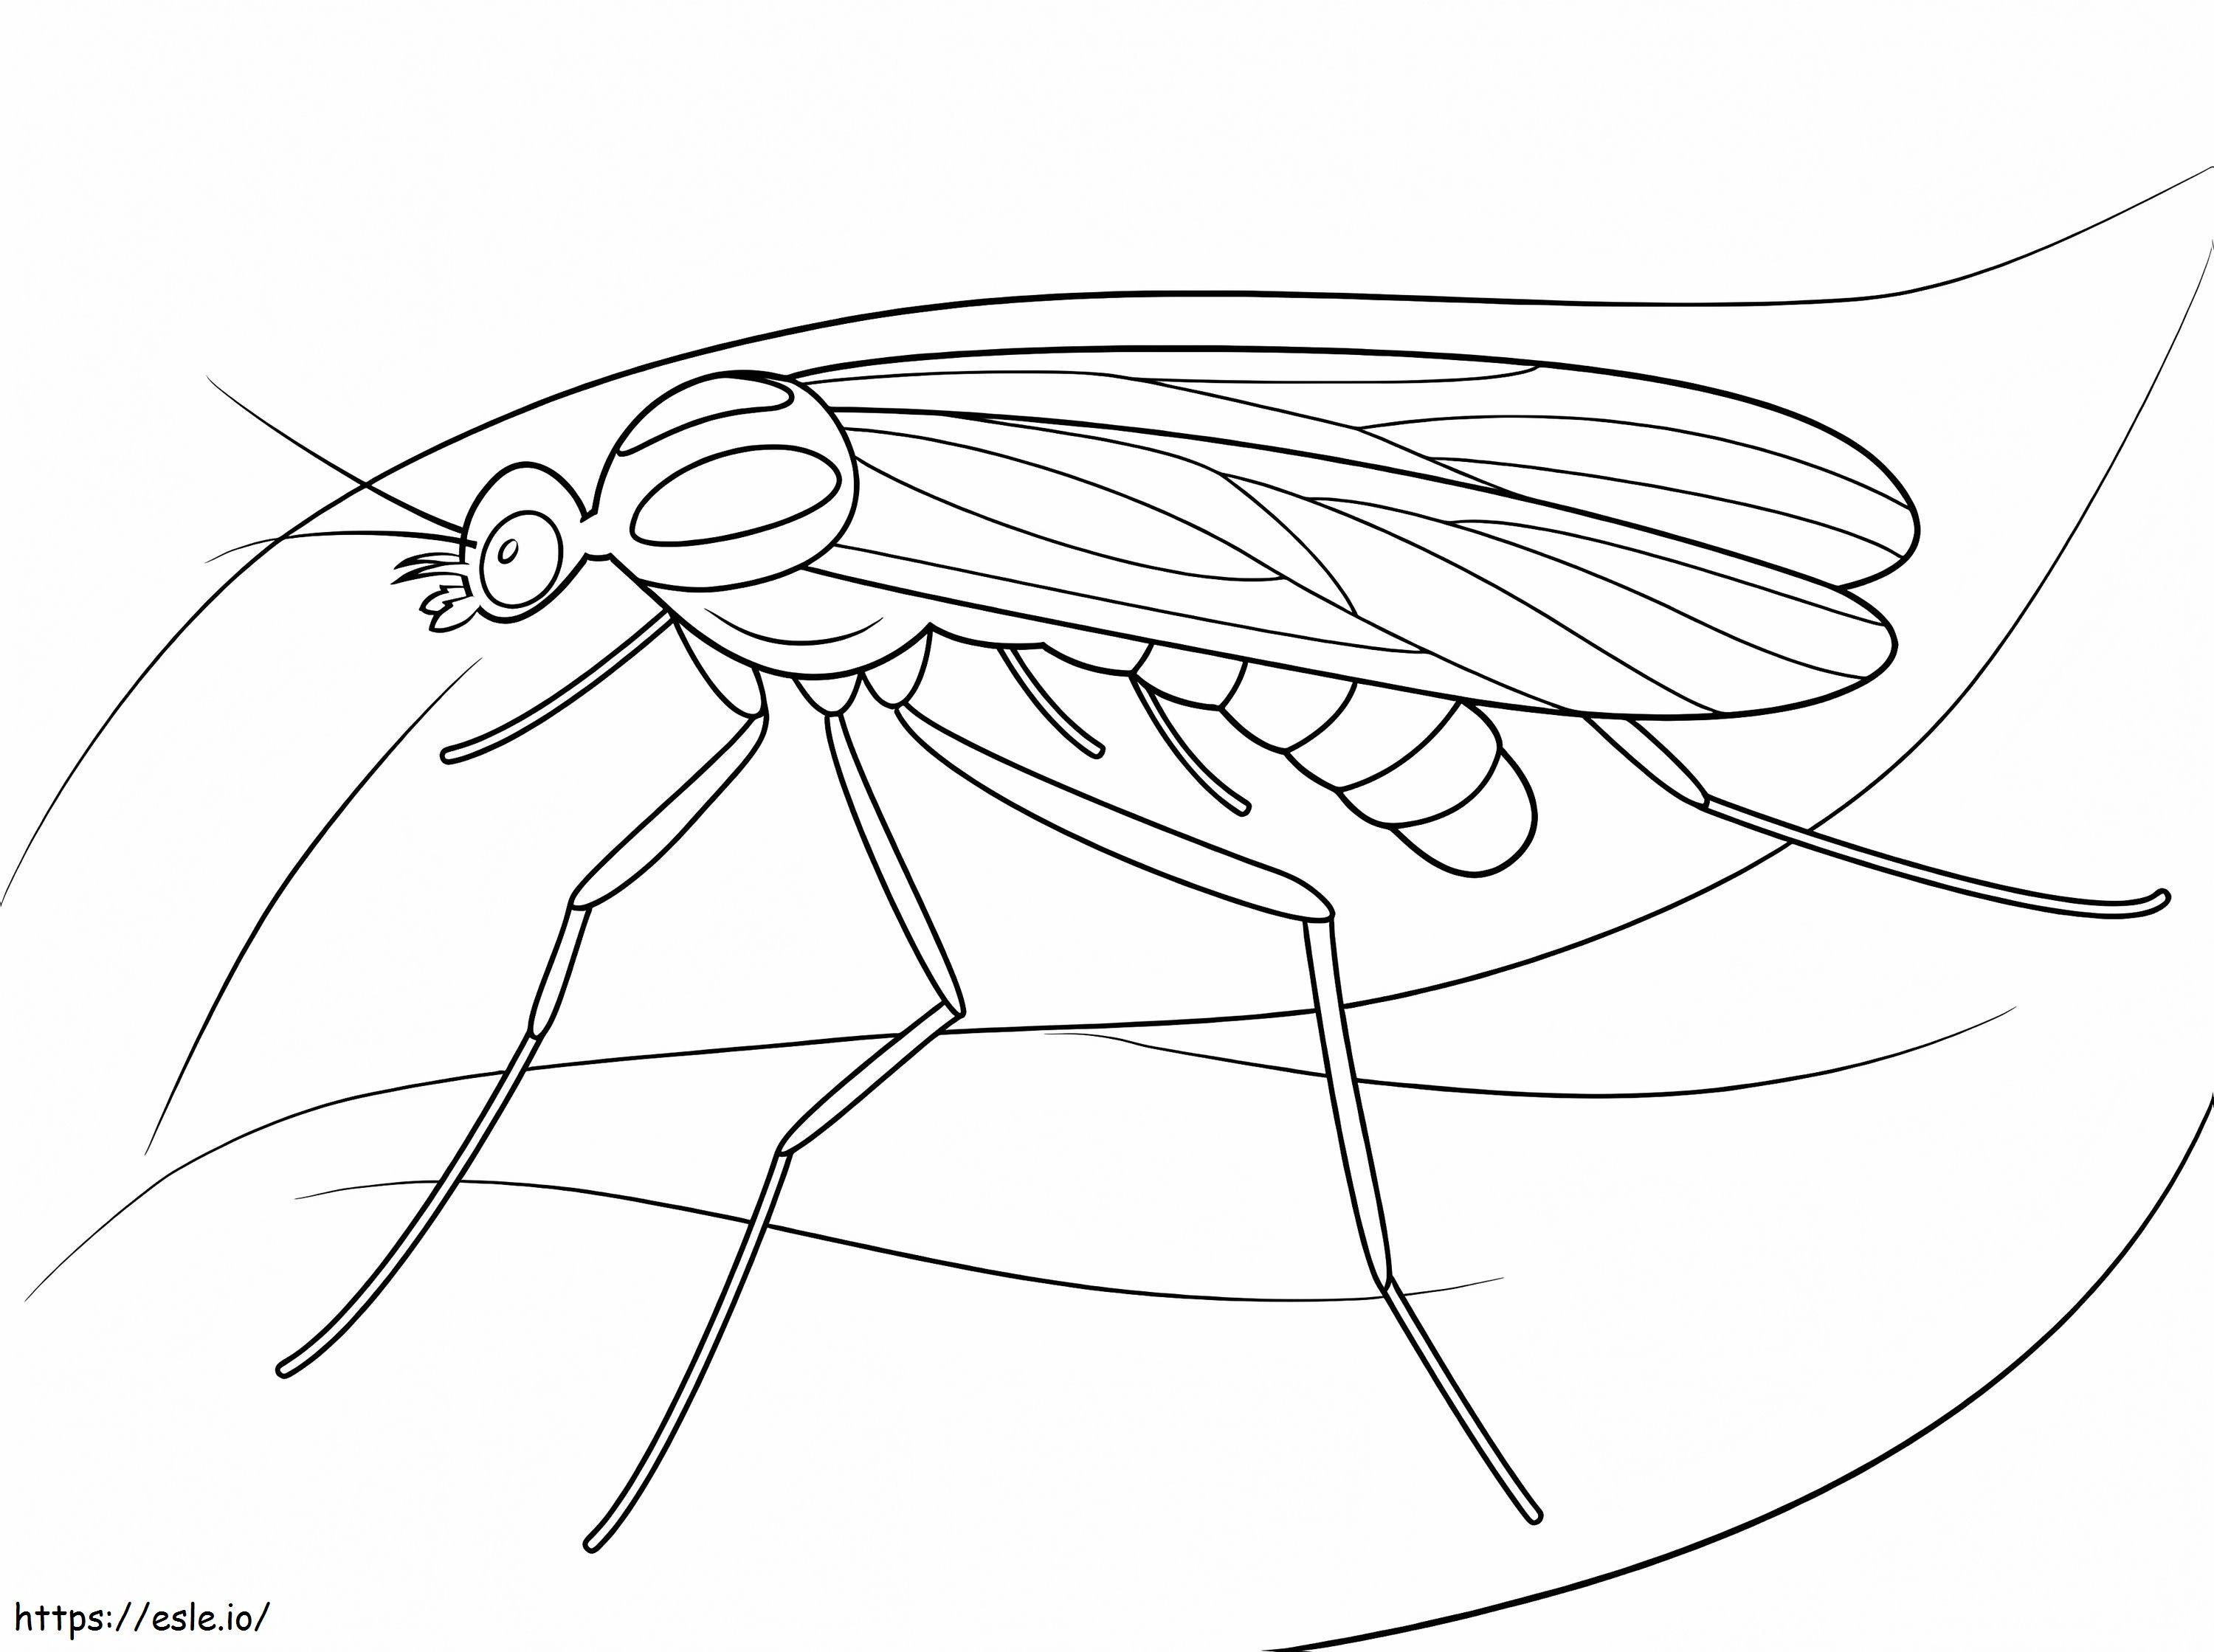 Window Gnat coloring page